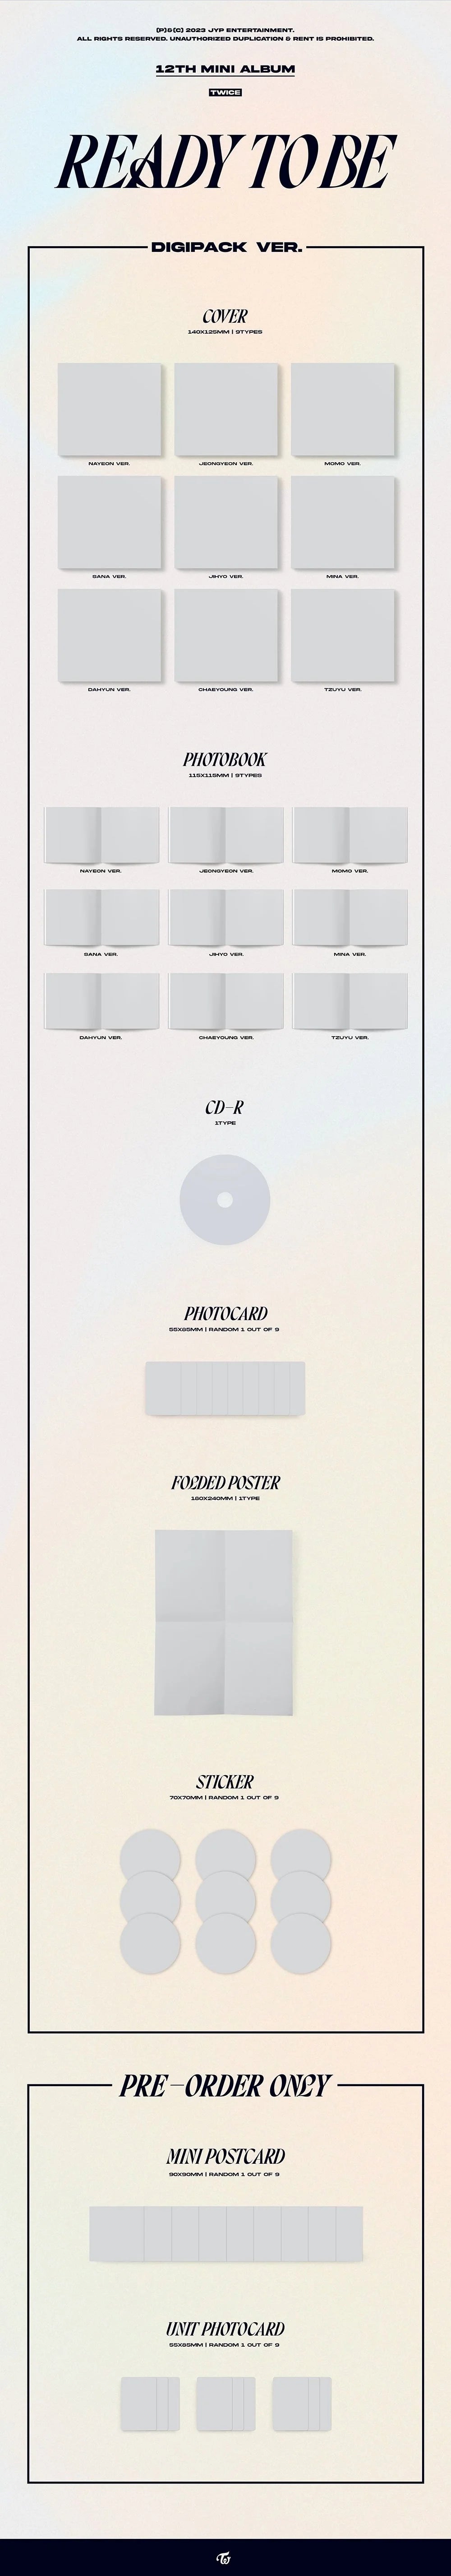 TWICE - 12TH MINI ALBUM READY TO BE   DIGIPACK VER. Infographic